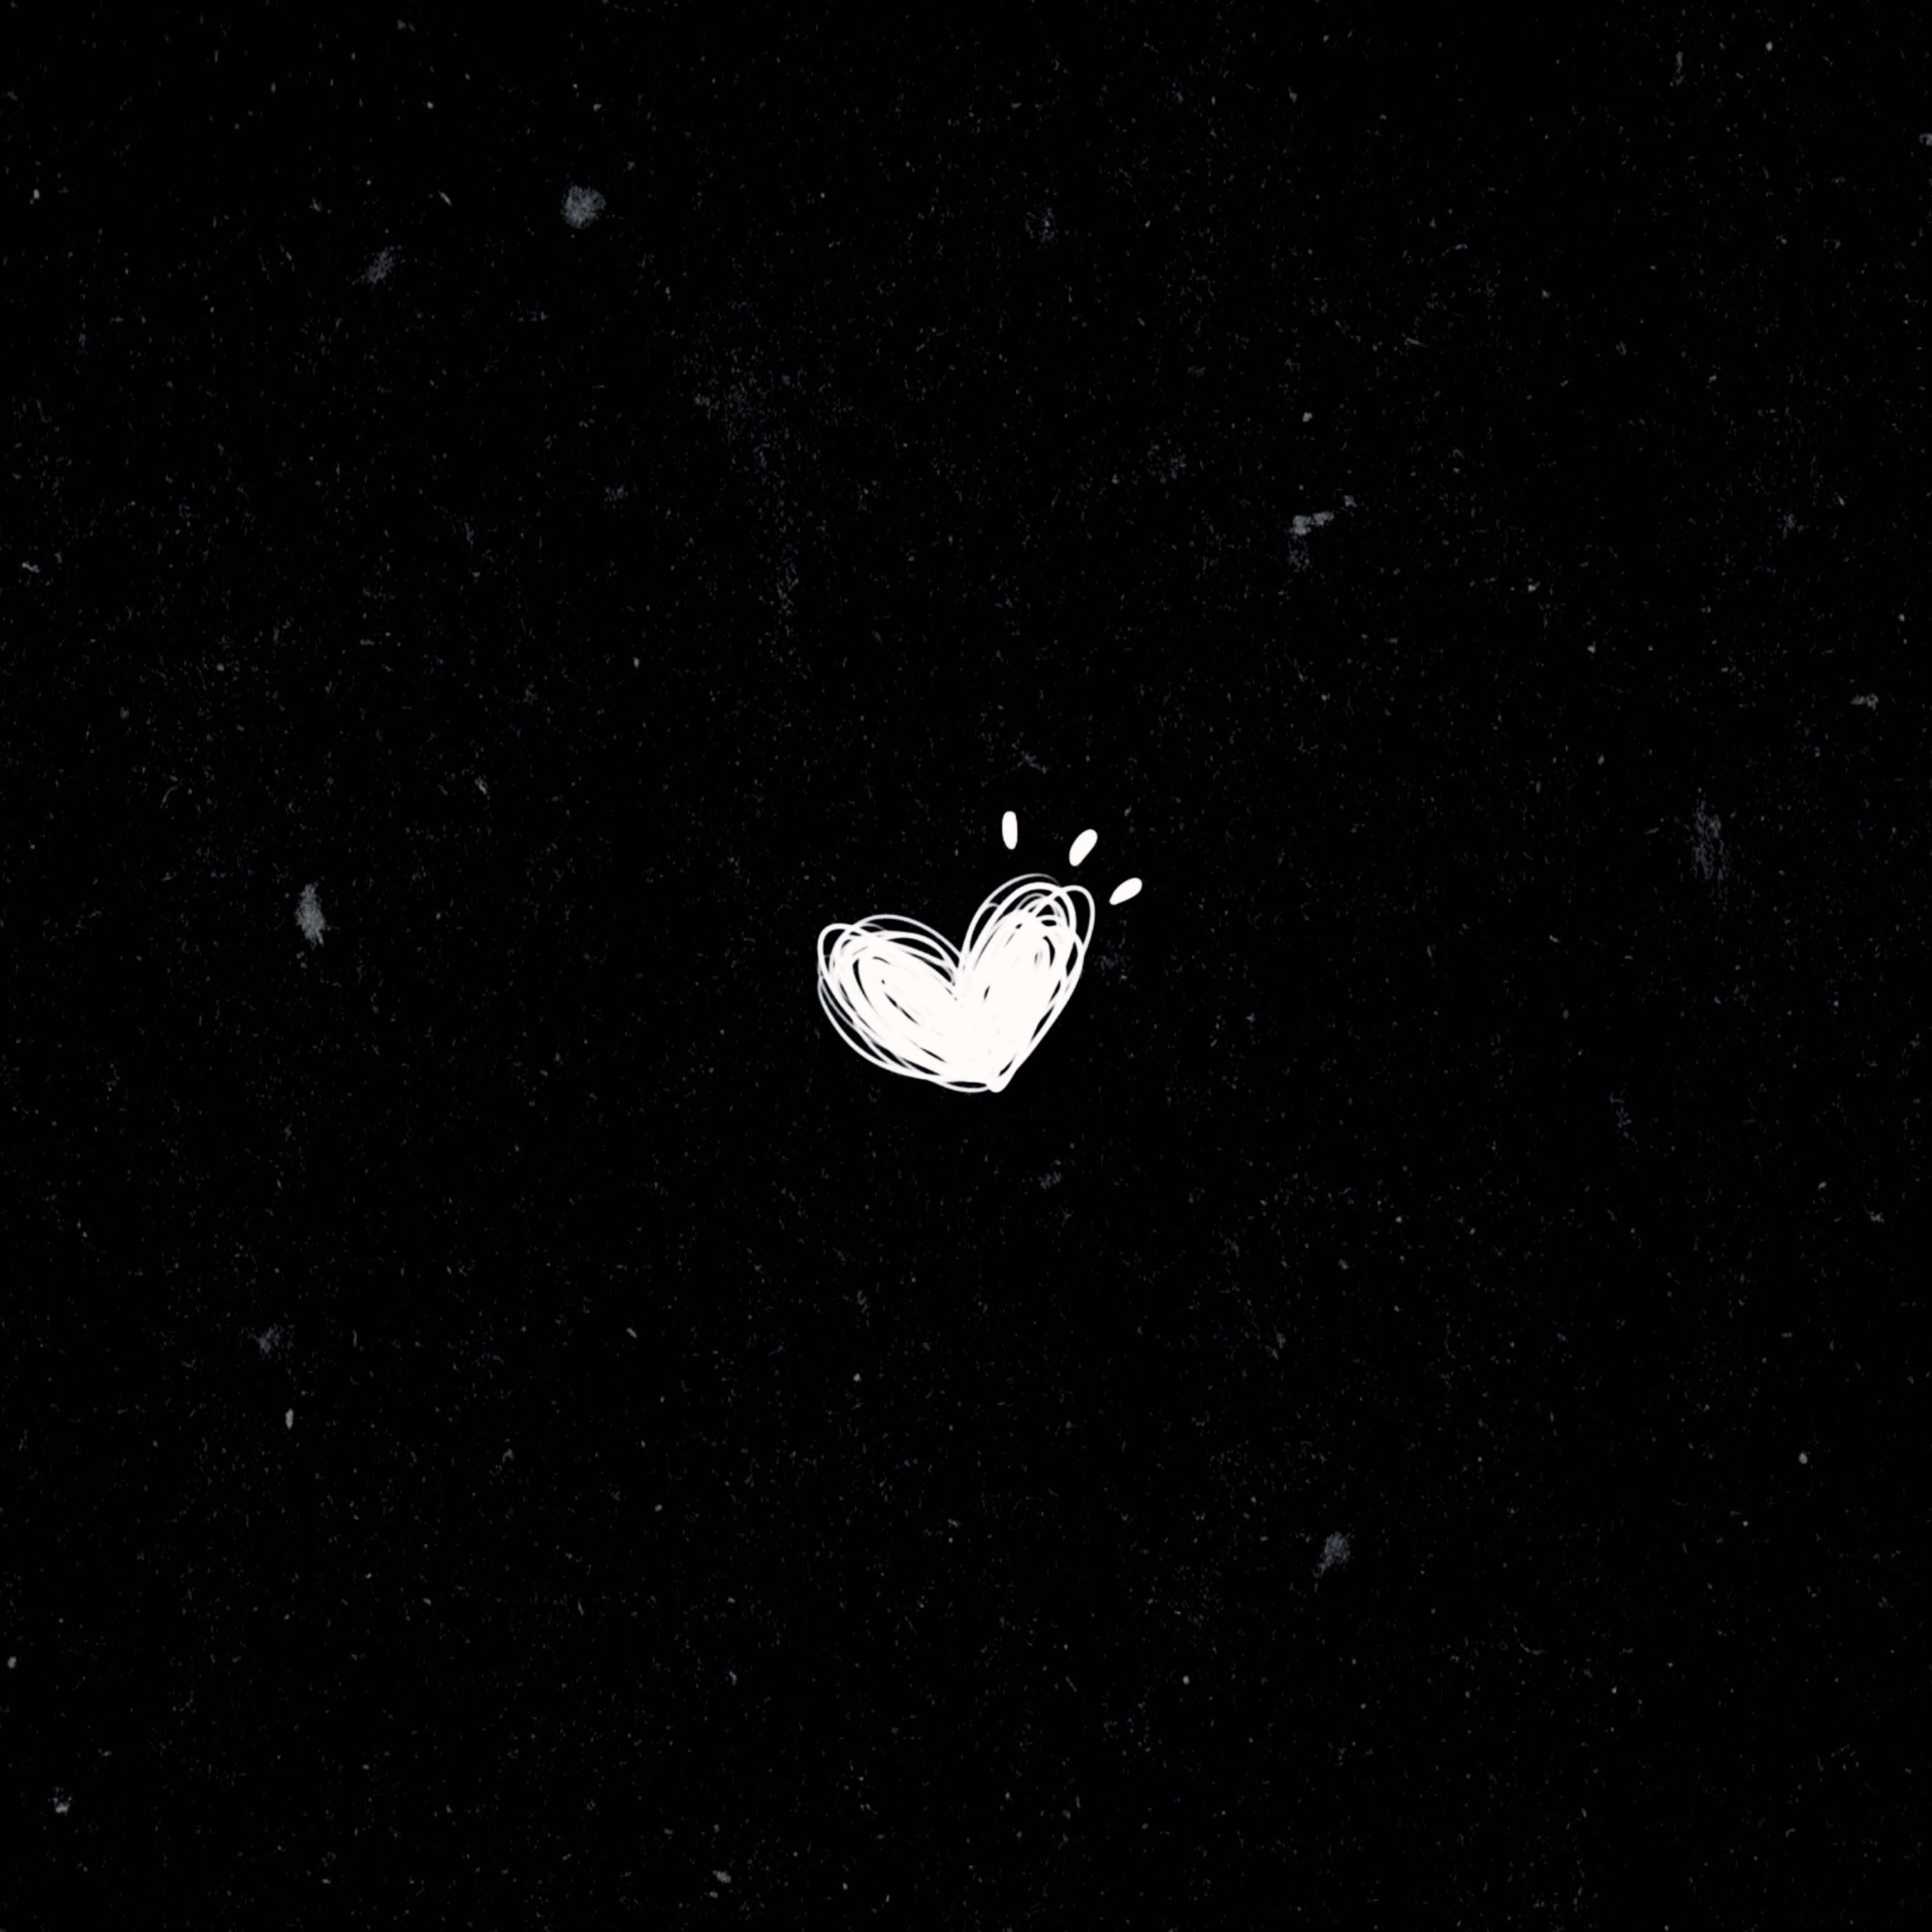 A heart drawn on a black background - Black heart, doodles